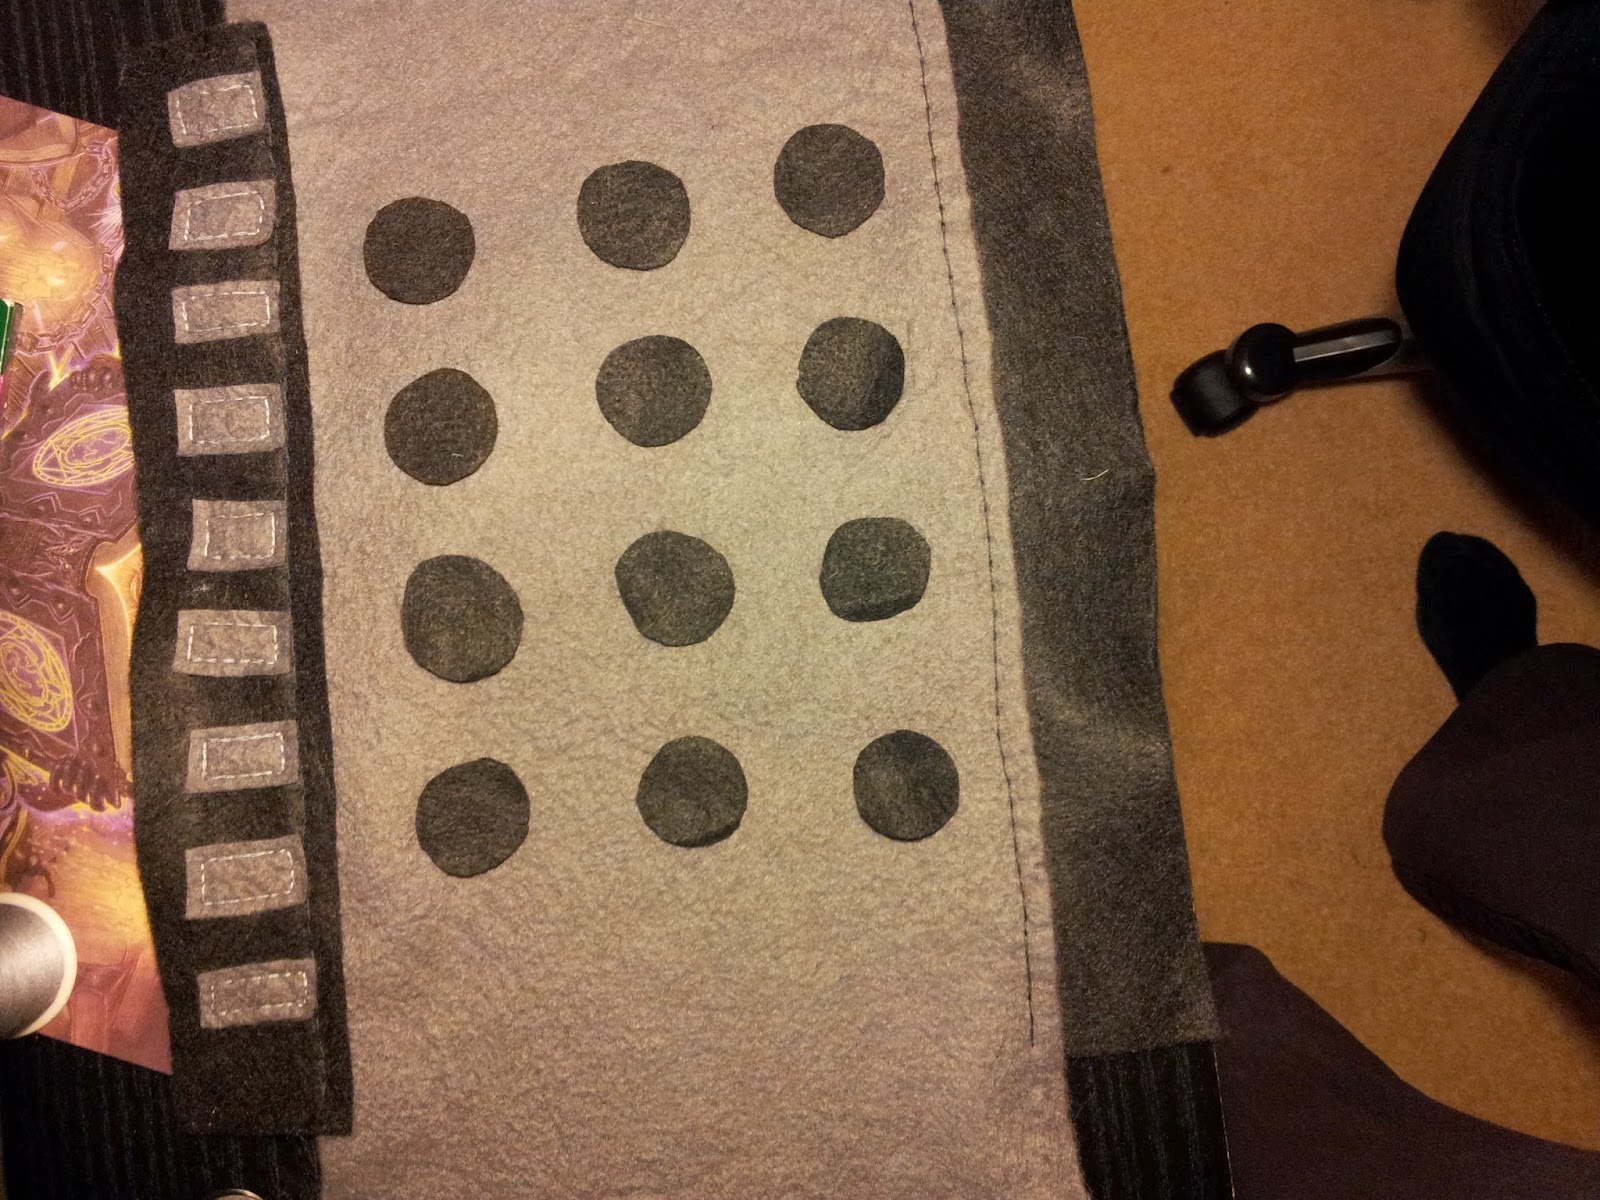 The part finished fabric of the body of the hollow dalek